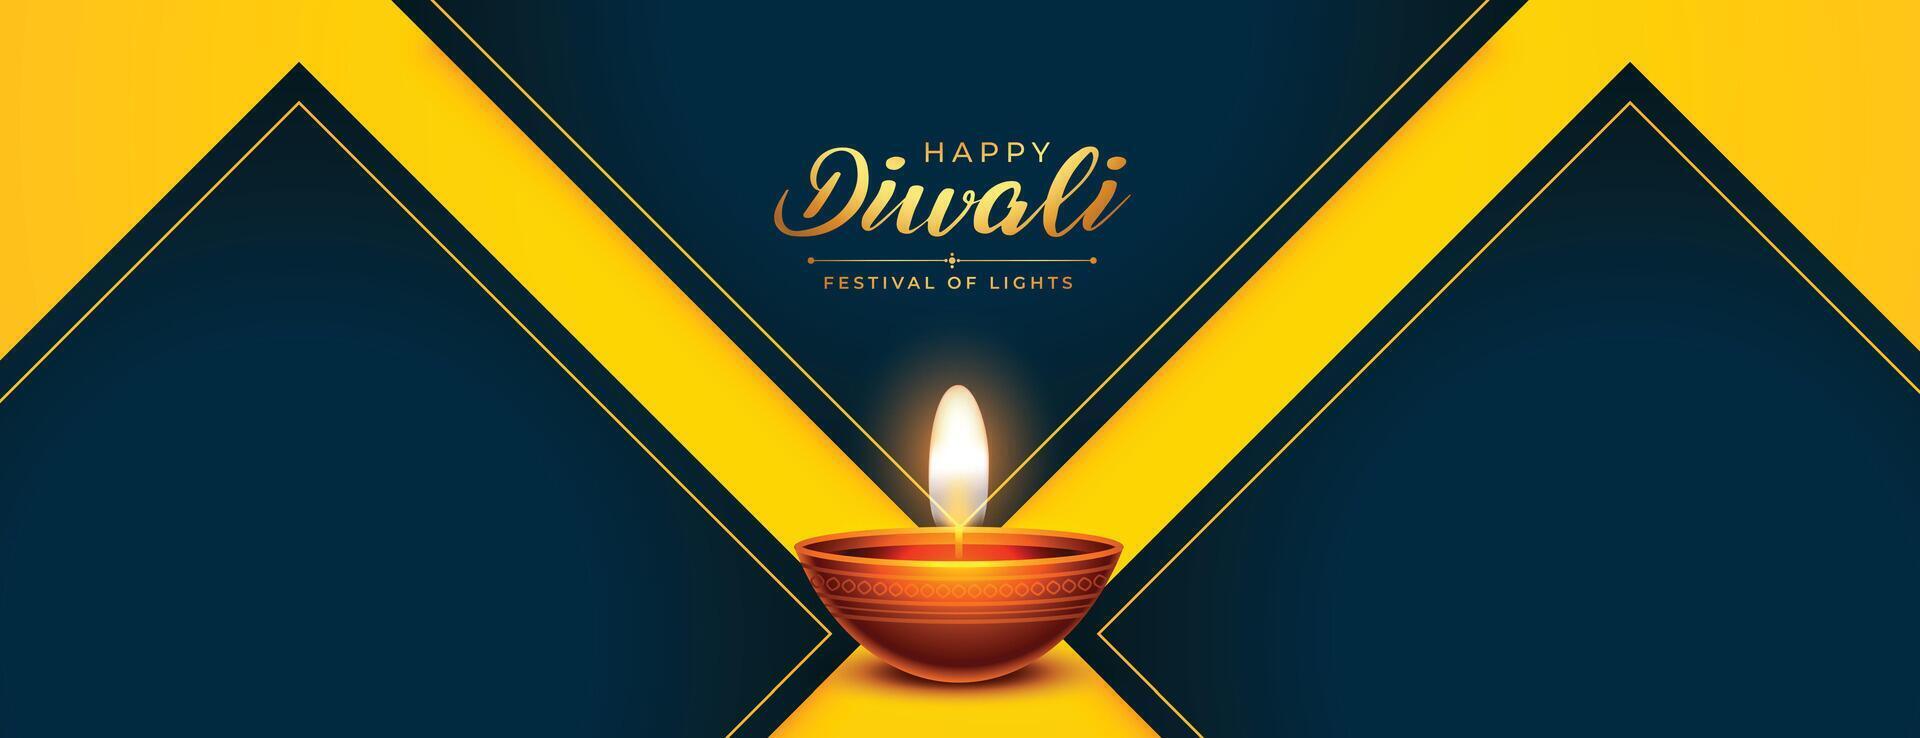 stylish happy diwali festival banner with realistic oil lamp vector